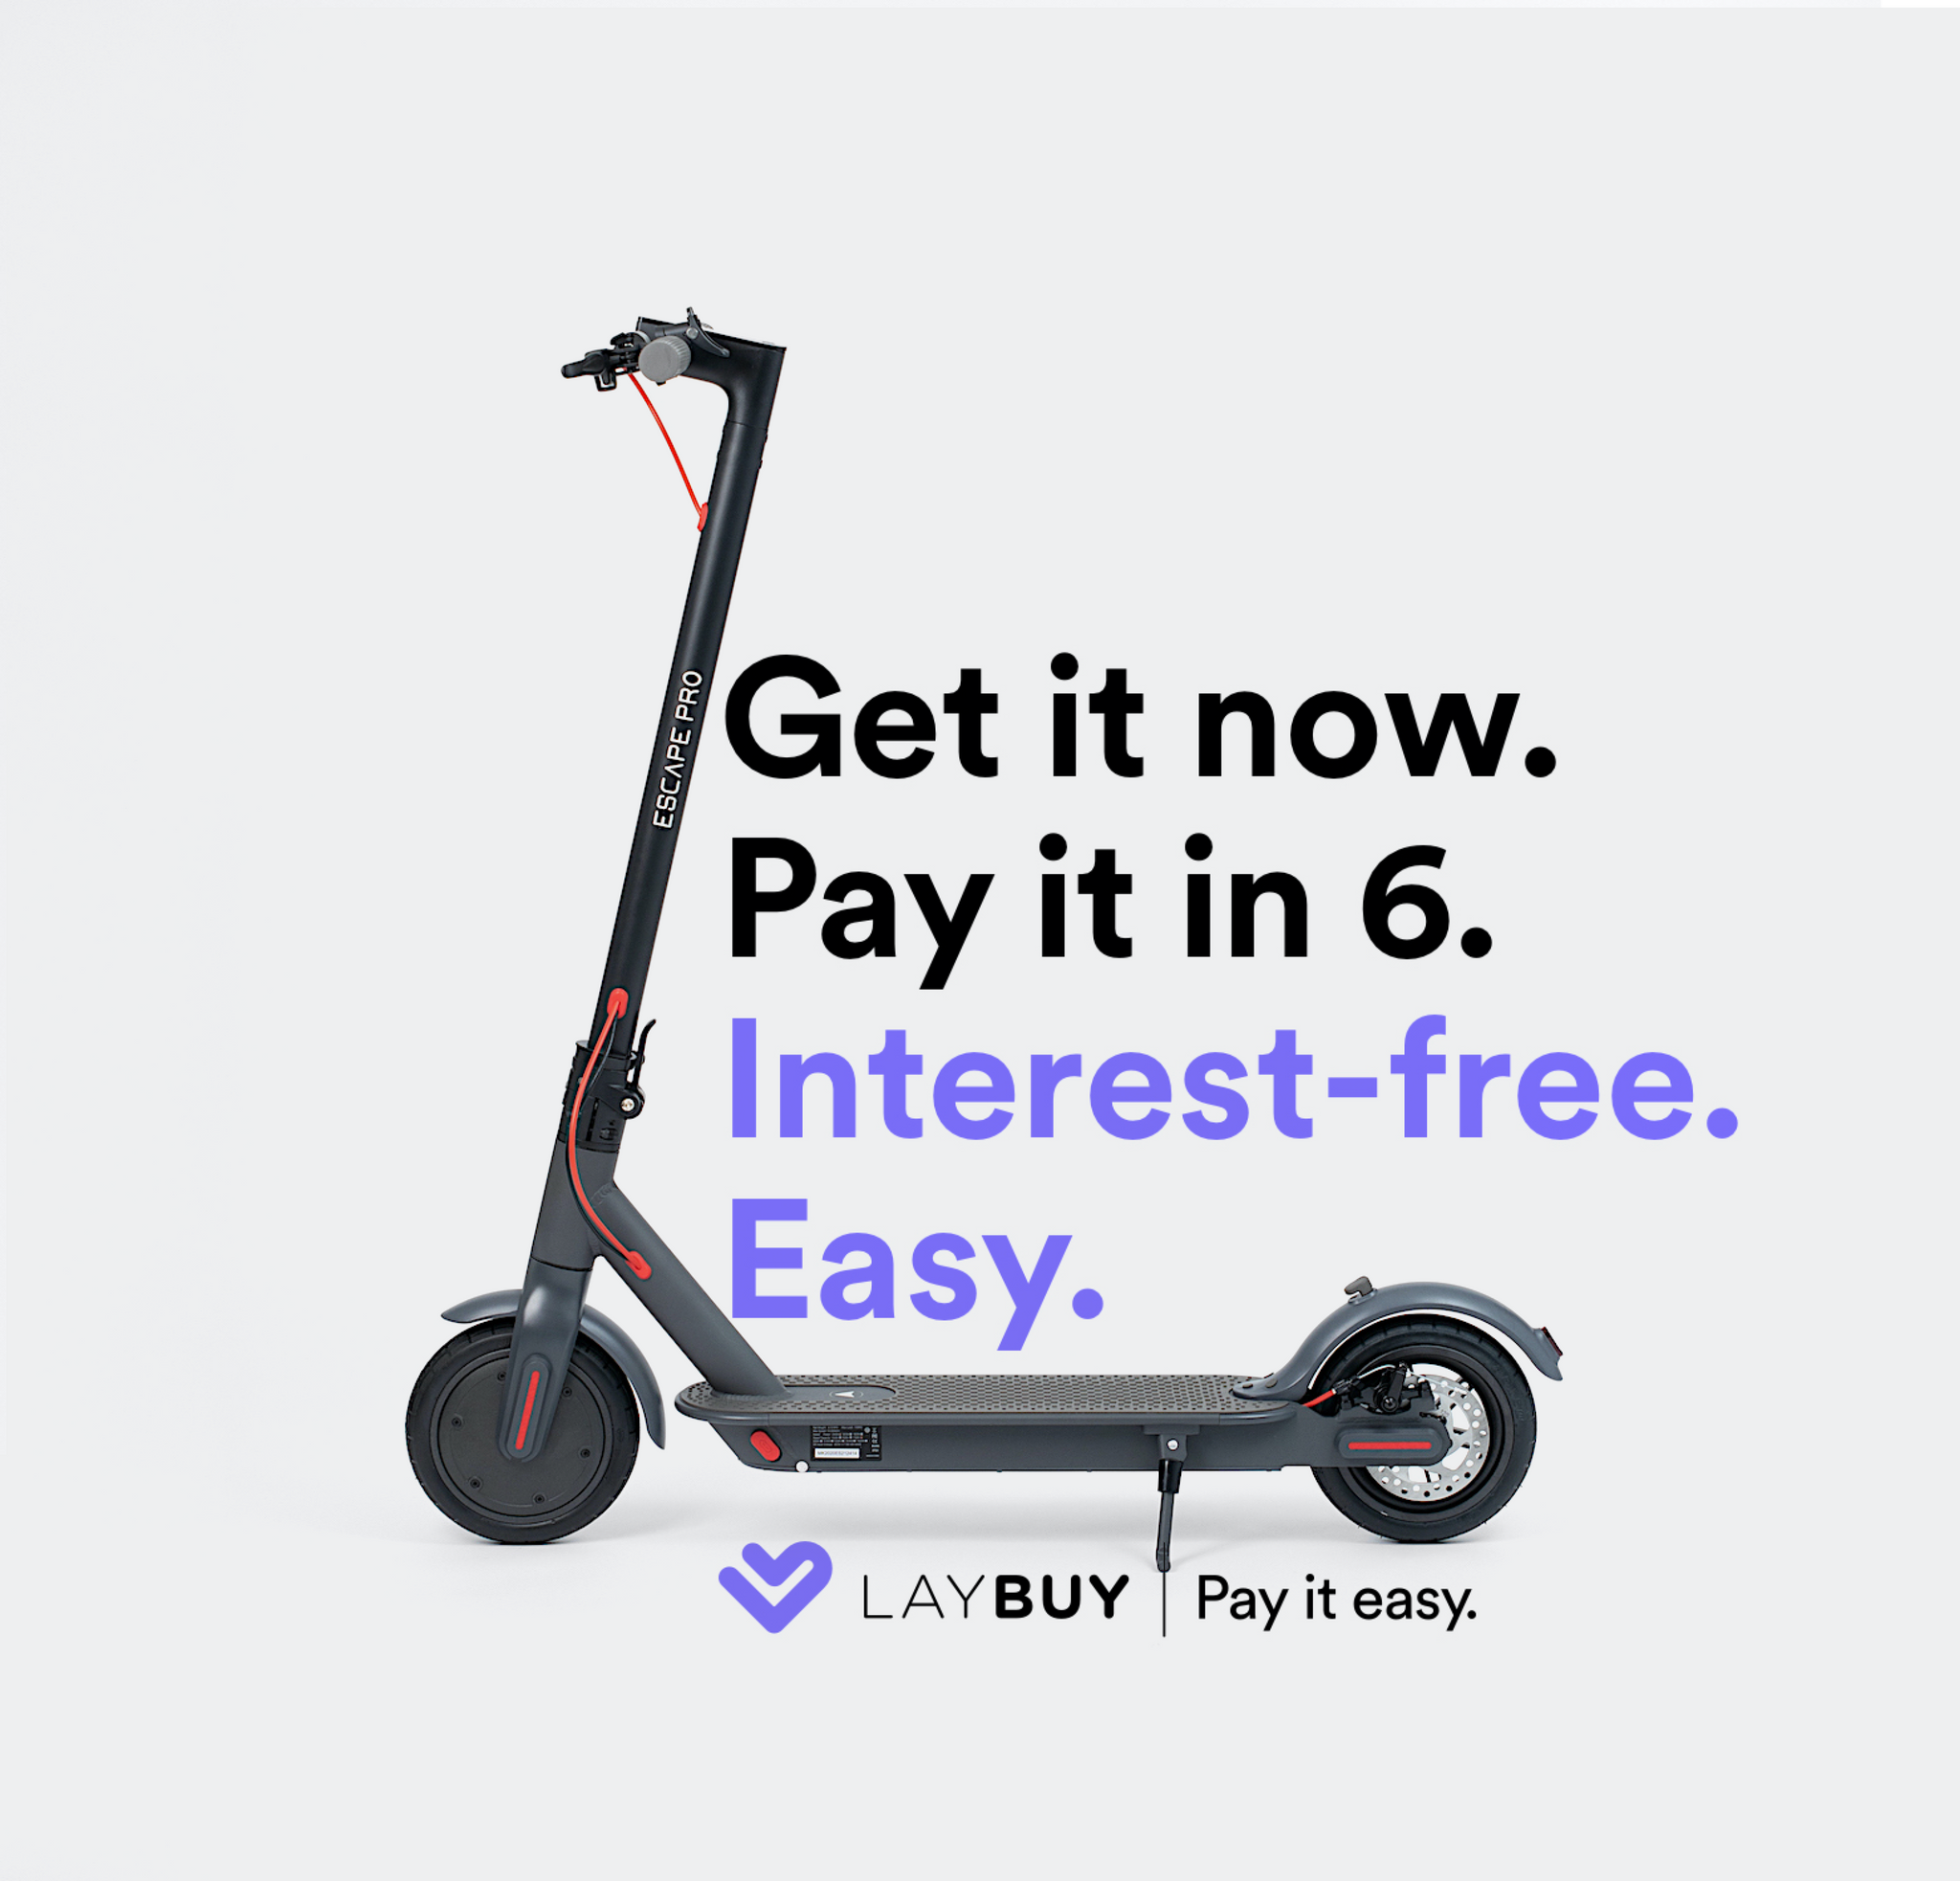 Interest-free payments with Laybuy With Ridezar.